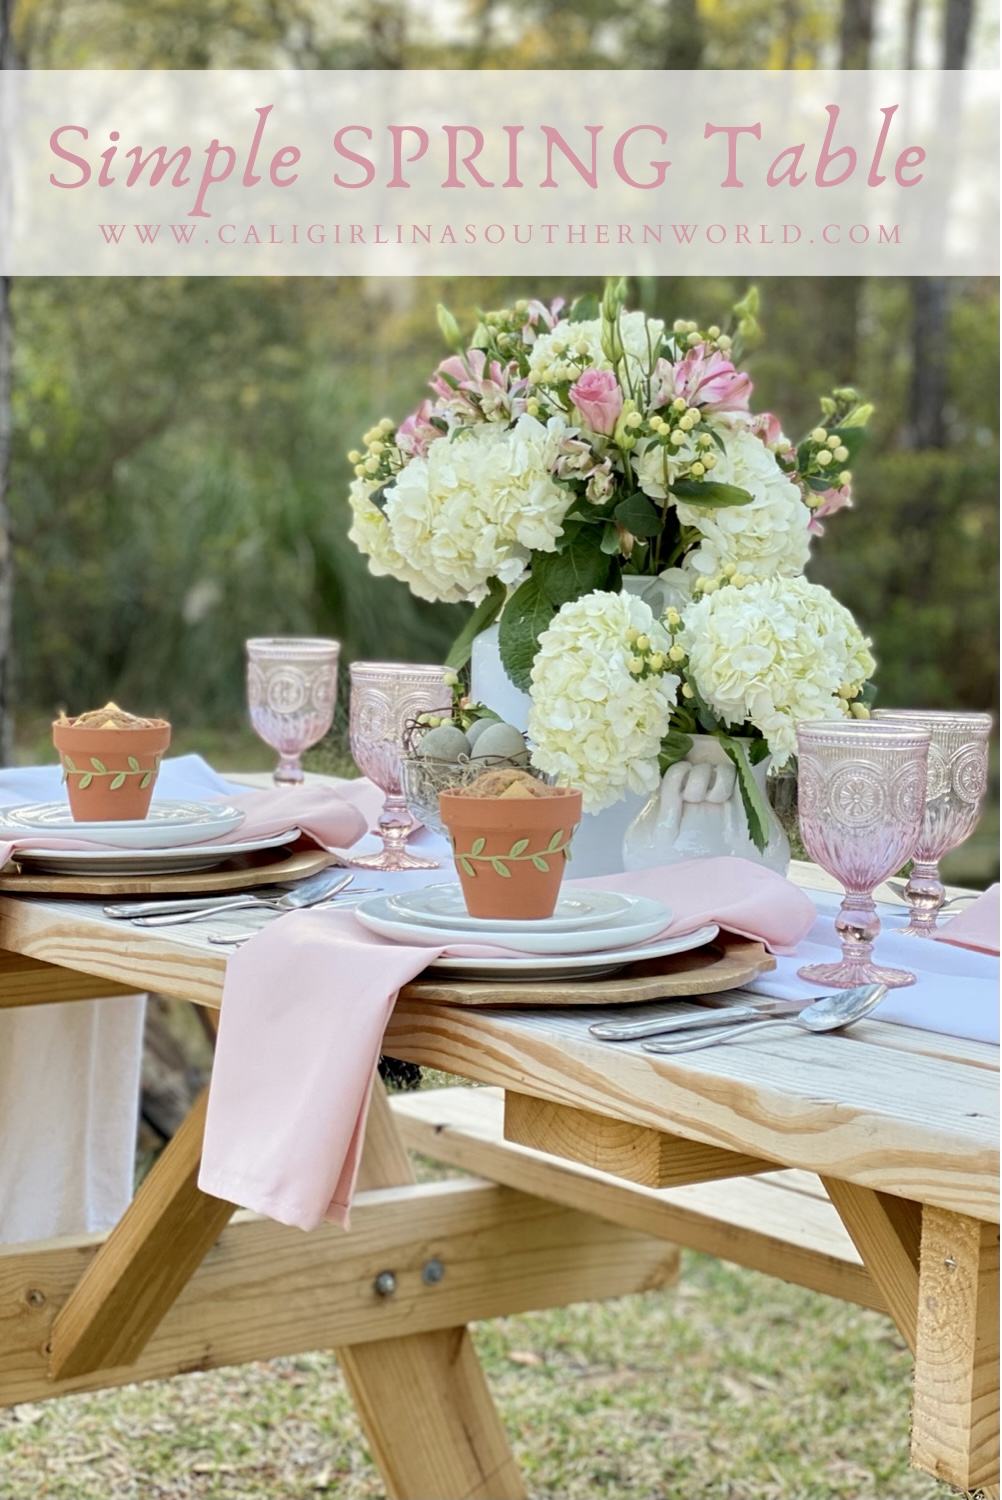 Pinterest Pin for How to Set a Simple Spring Table.